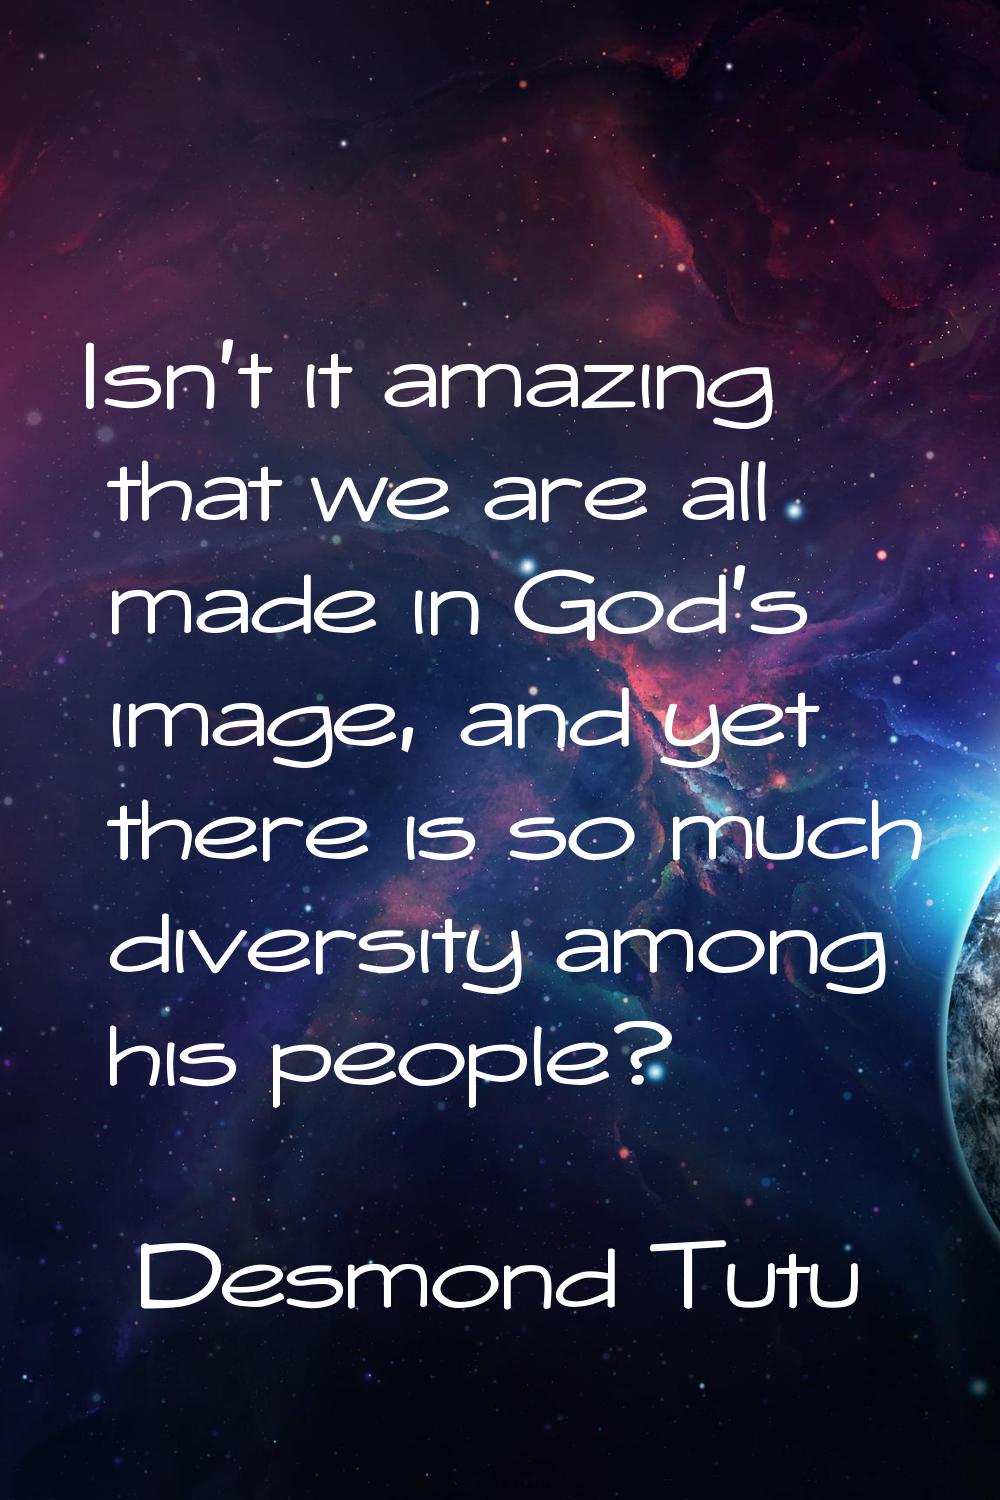 Isn't it amazing that we are all made in God's image, and yet there is so much diversity among his 